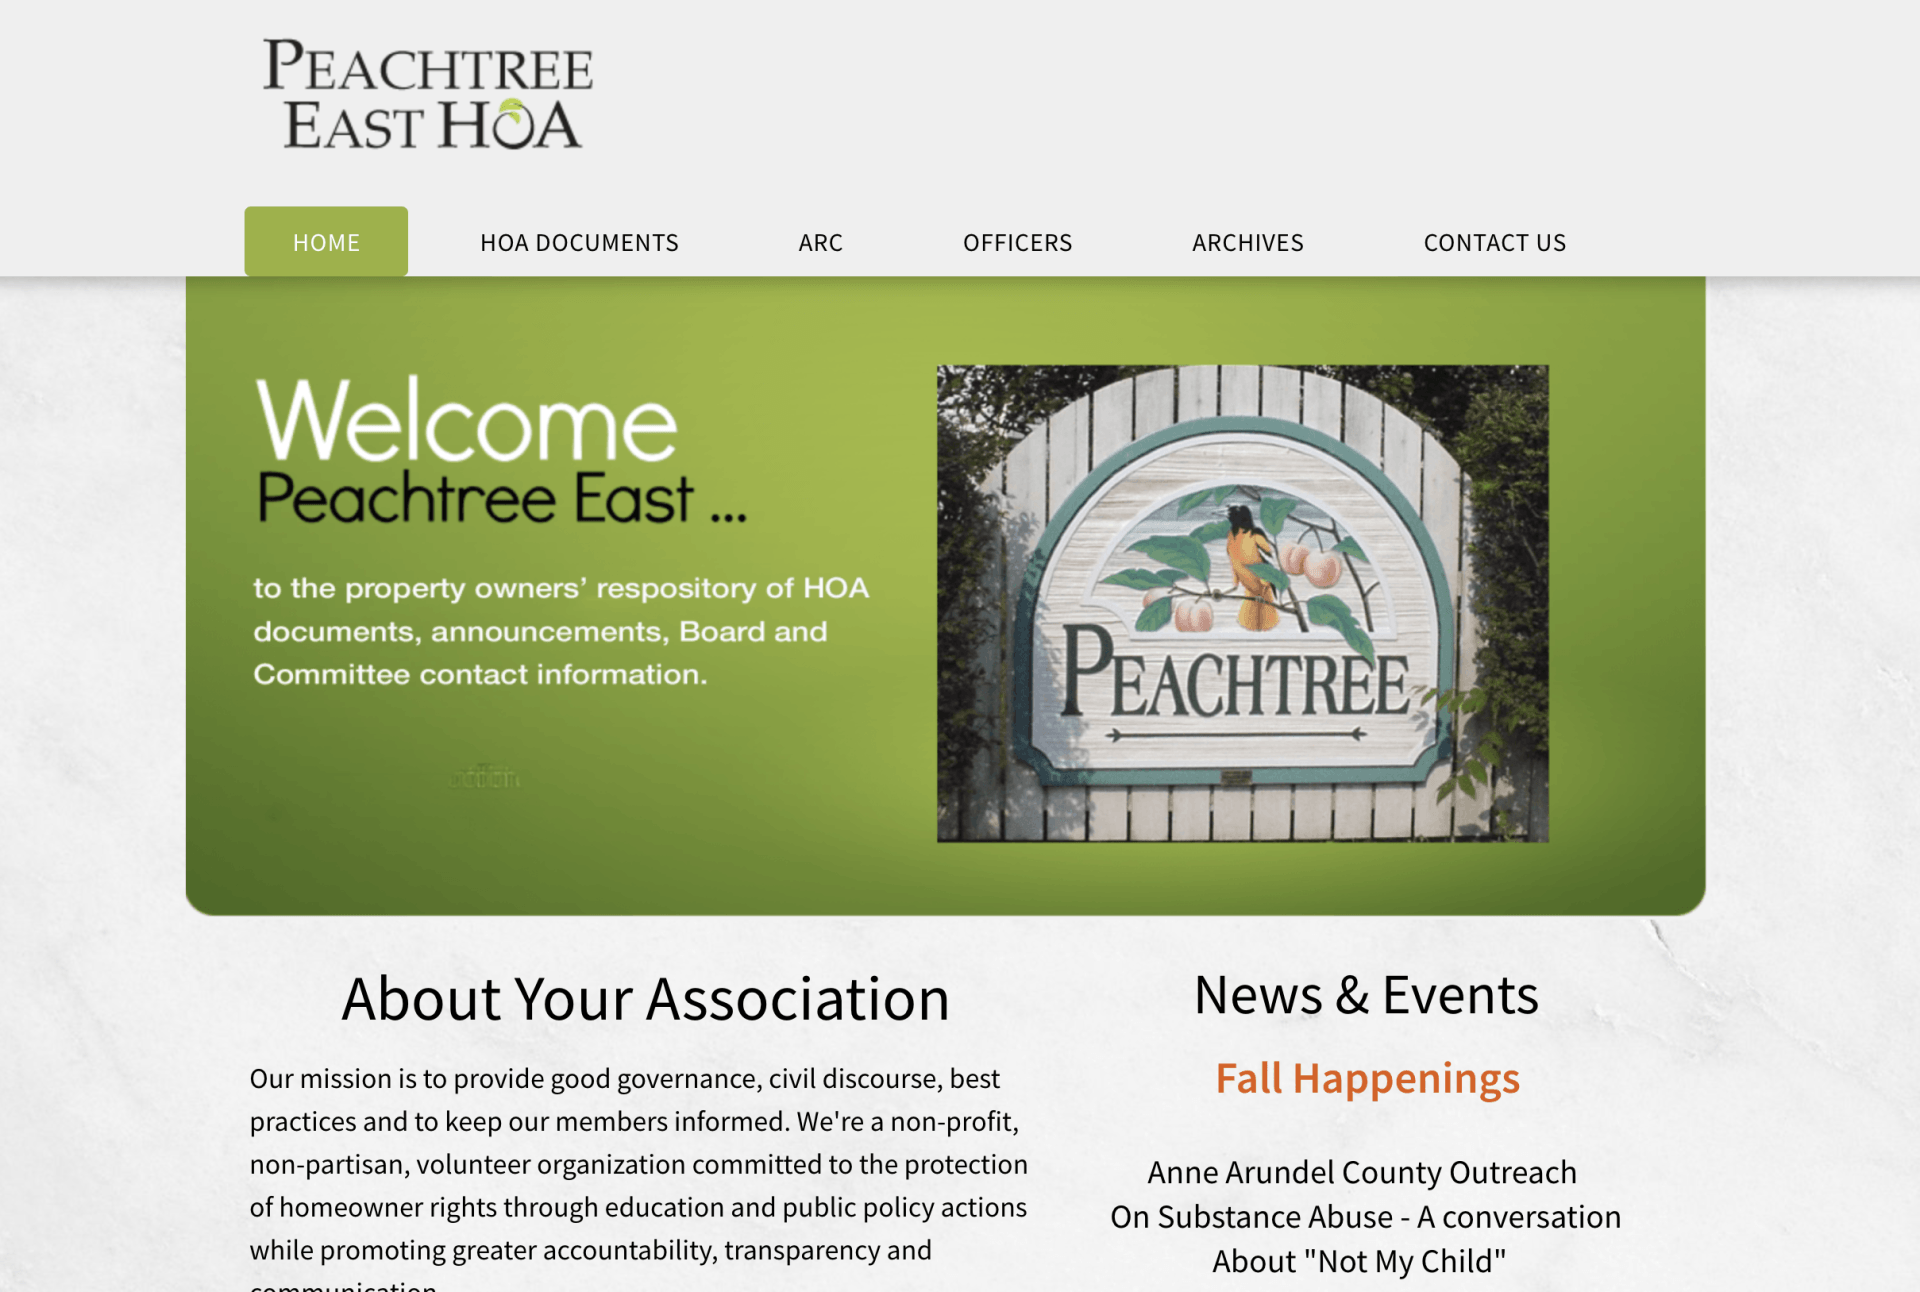 A peachtree east hoa website shows a welcome page